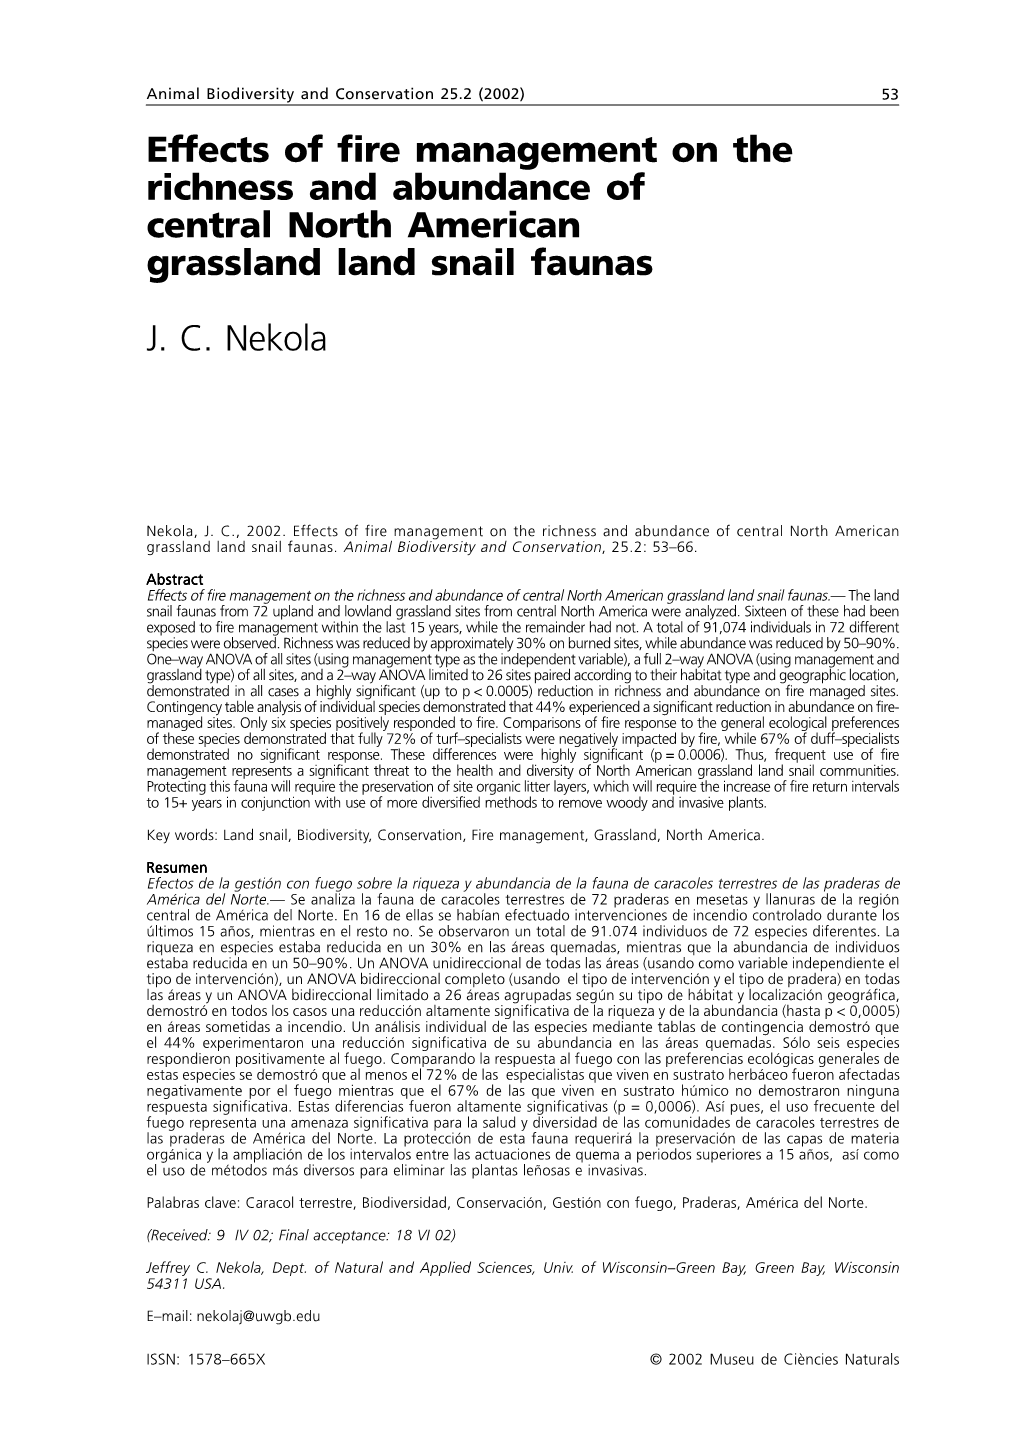 Effects of Fire Management on the Richness and Abundance of Central North American Grassland Land Snail Faunas